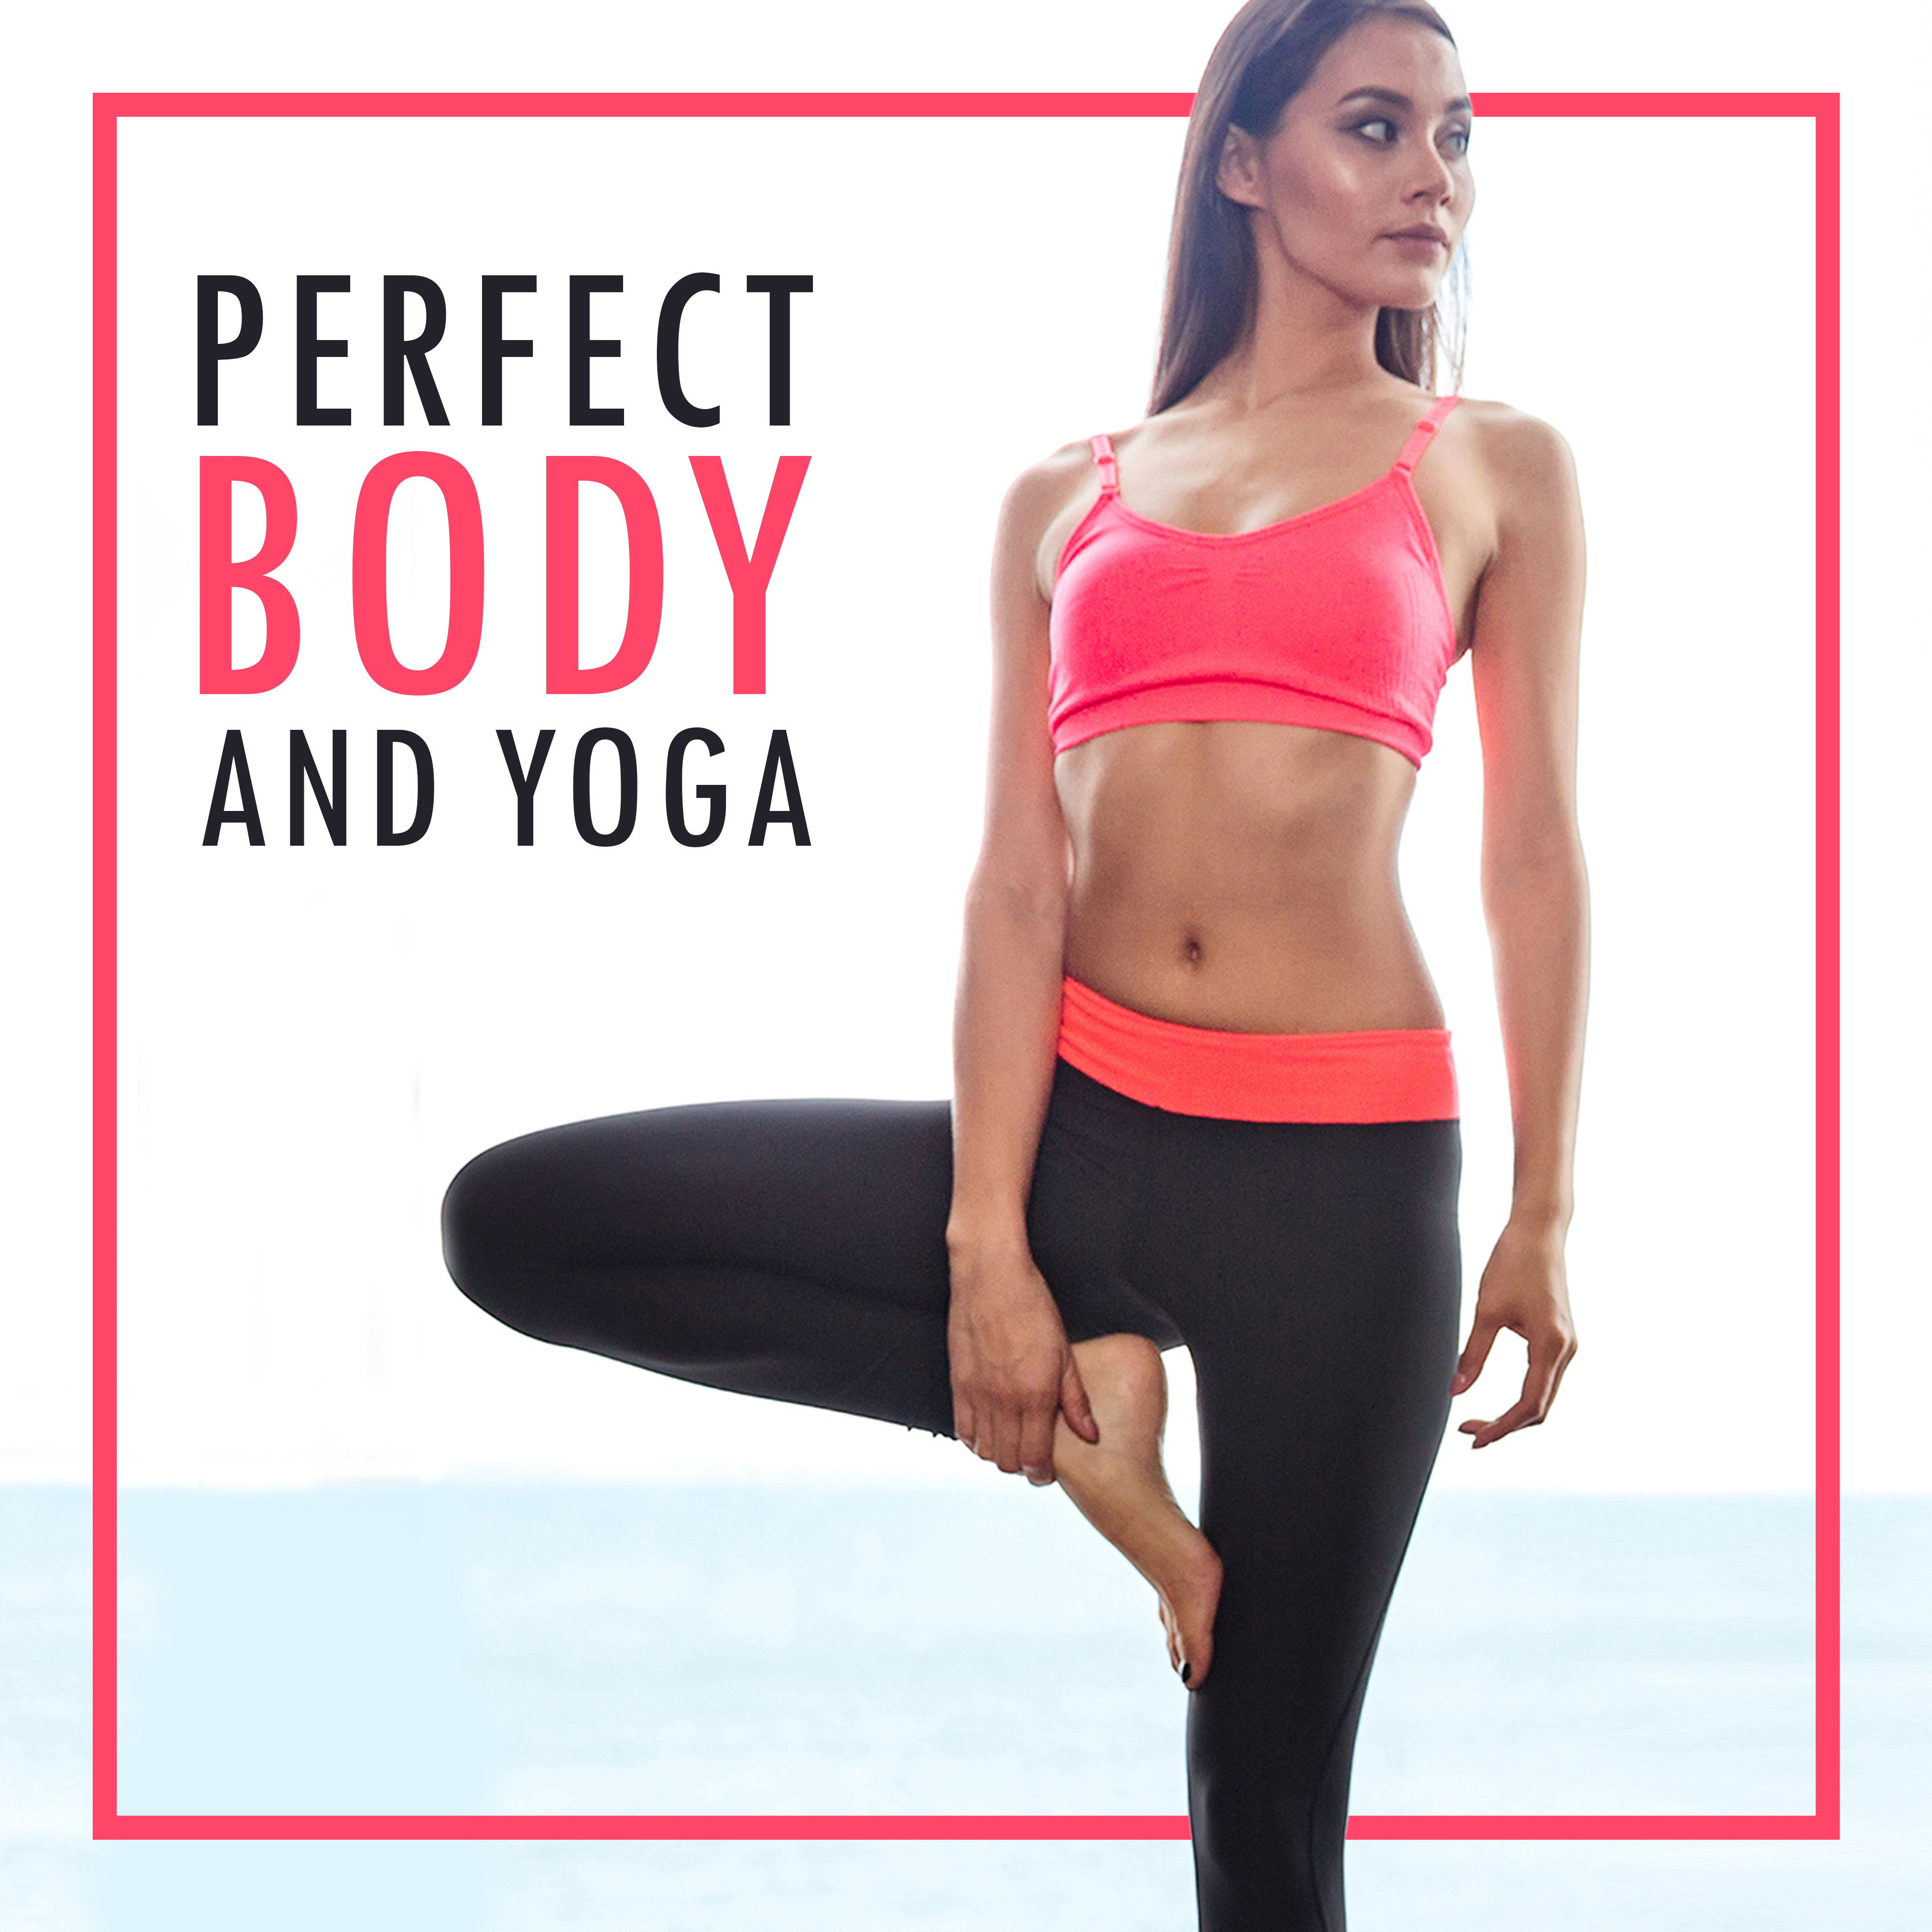 Perfect Body and Yoga